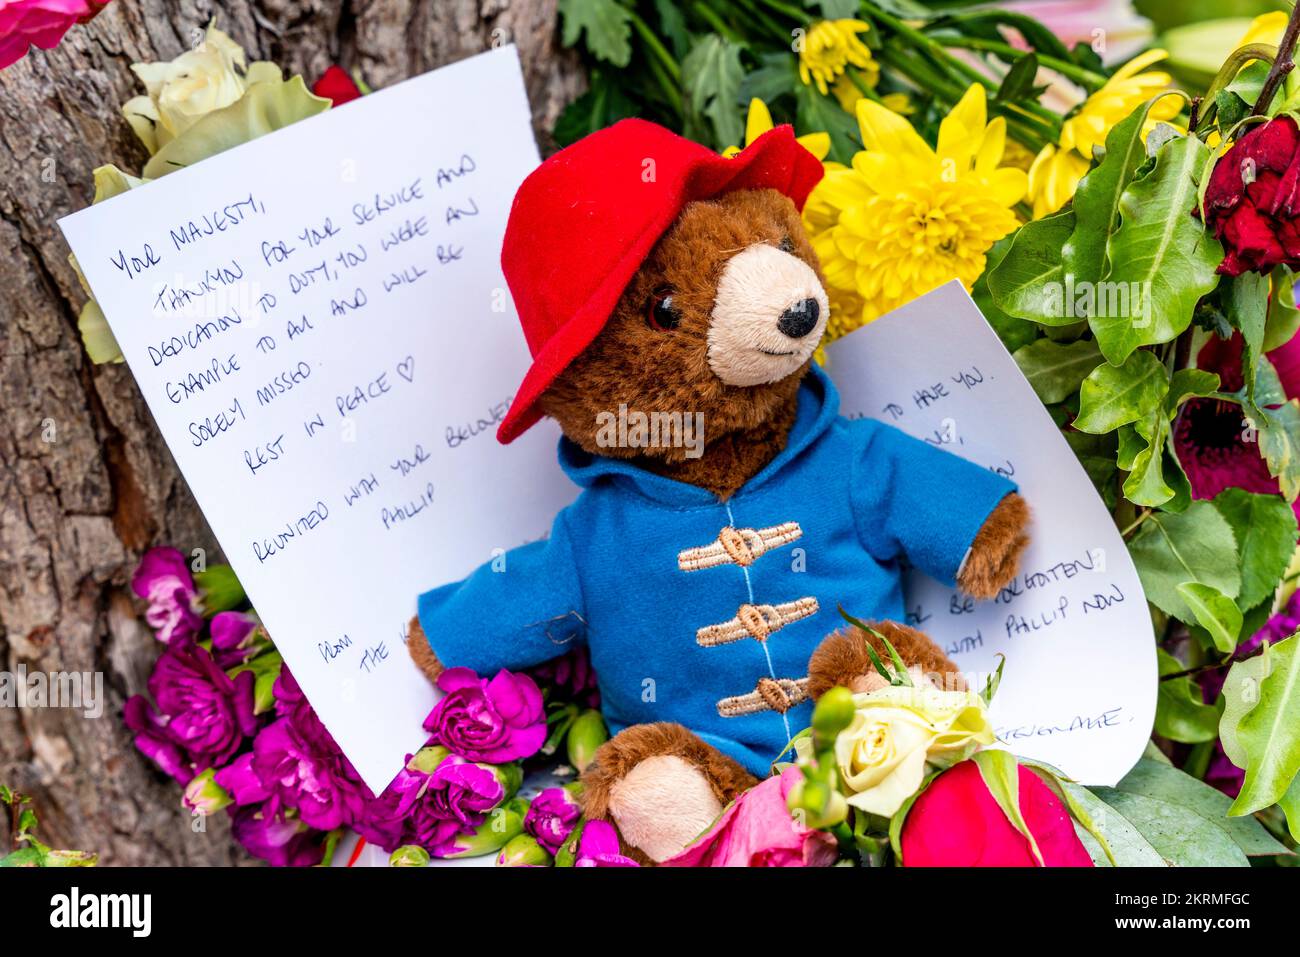 A Paddington Bear and Floral Tributes For Queen Elizabeth II In The Floral Tribute Garden In Green Park, London, UK. Stock Photo